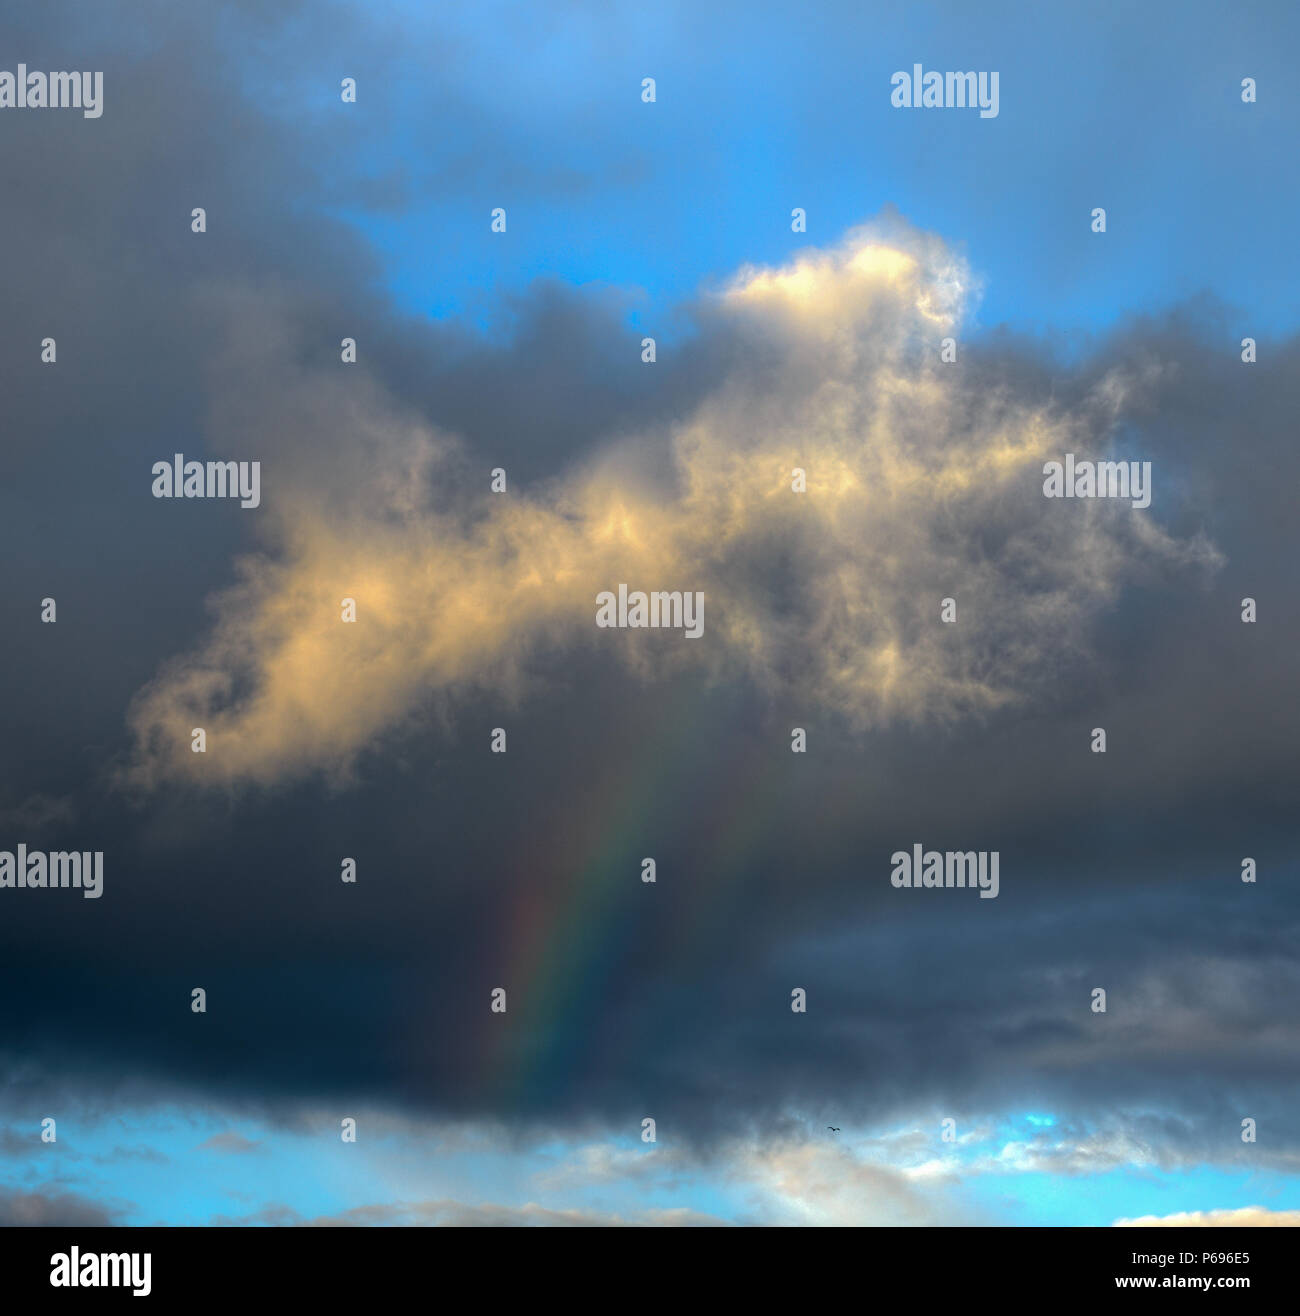 Small and colorful rainbow under a solitary cloud, with a background of gray clouds and blue sky Stock Photo